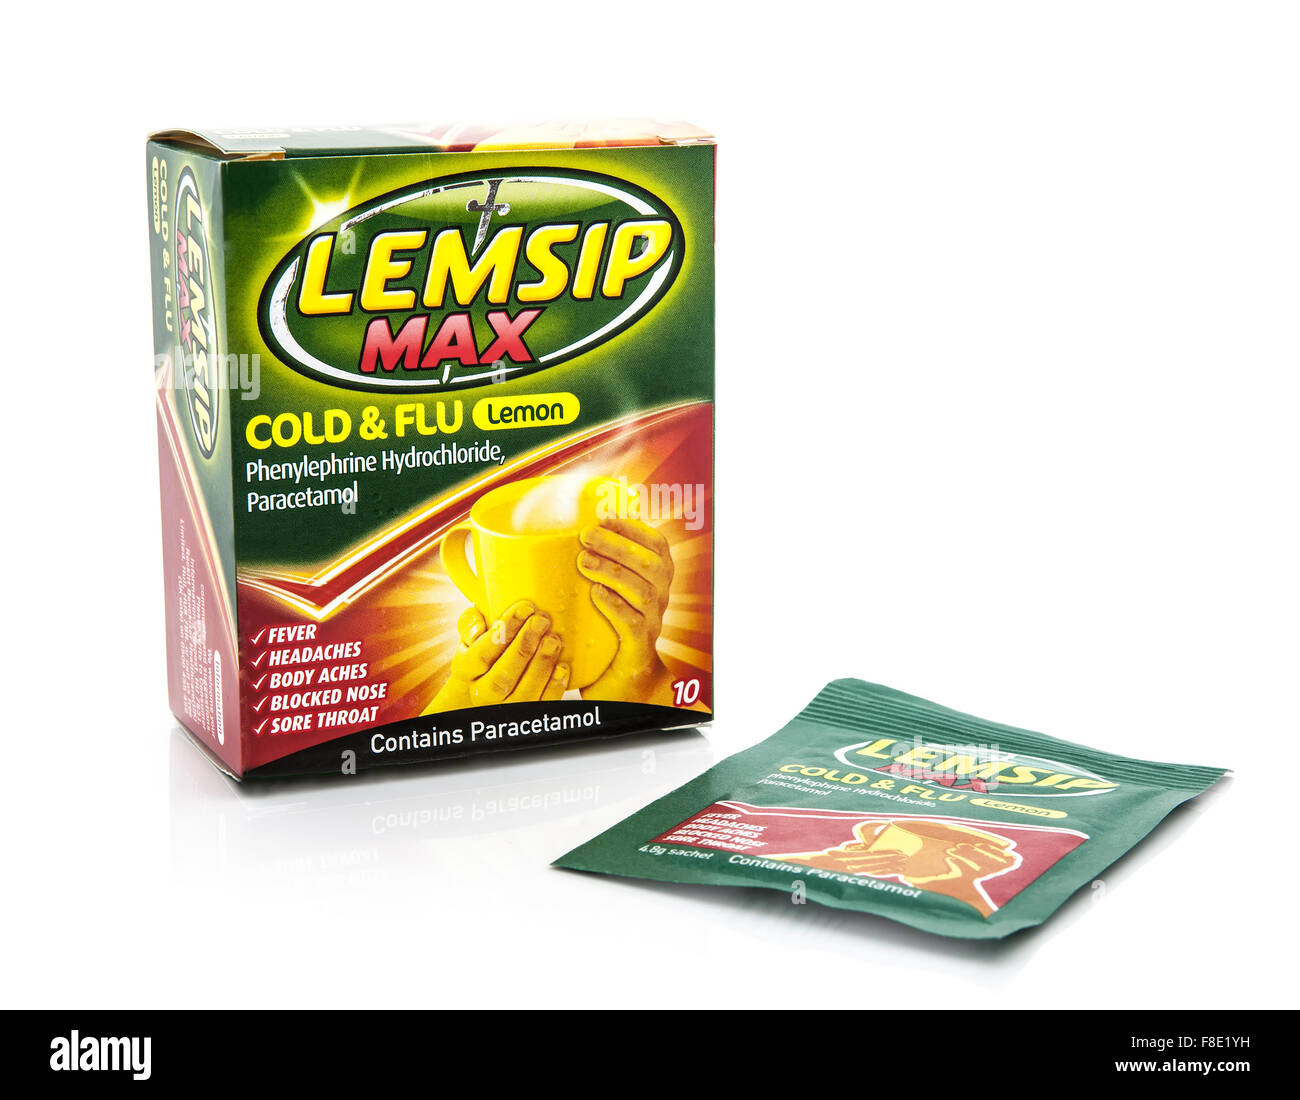 Lemsip Max for Cold and Flu on a white background Stock Photo